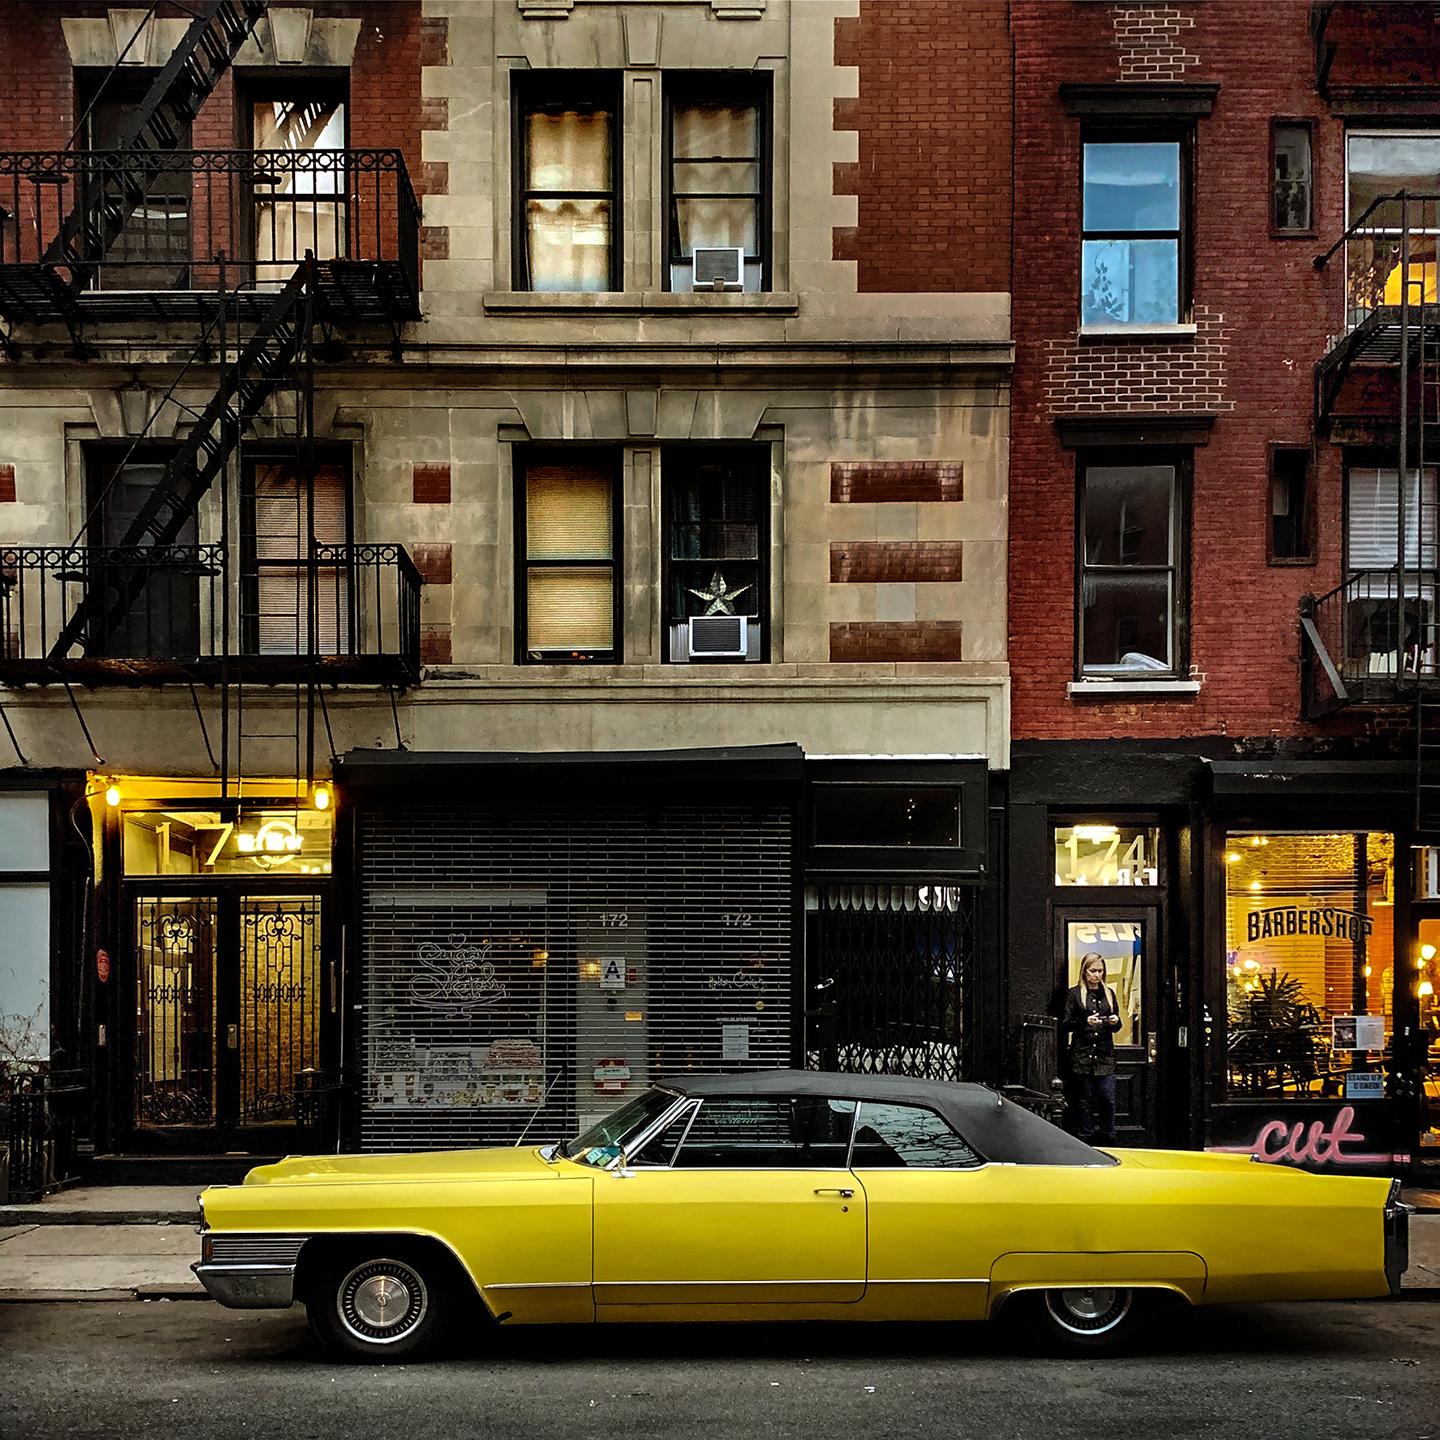 Artist: Sally Davies (1956)
Title: Ginsberg Bldg, 170 E 2nd St, Yellow Caddy (New York City)
Year: 2022
Medium: Inkjet print on archival paper
Edition: 12, plus proofs
Size: 17 x 17 inches
Condition: Excellent
Inscription: Signed, dated, titled by